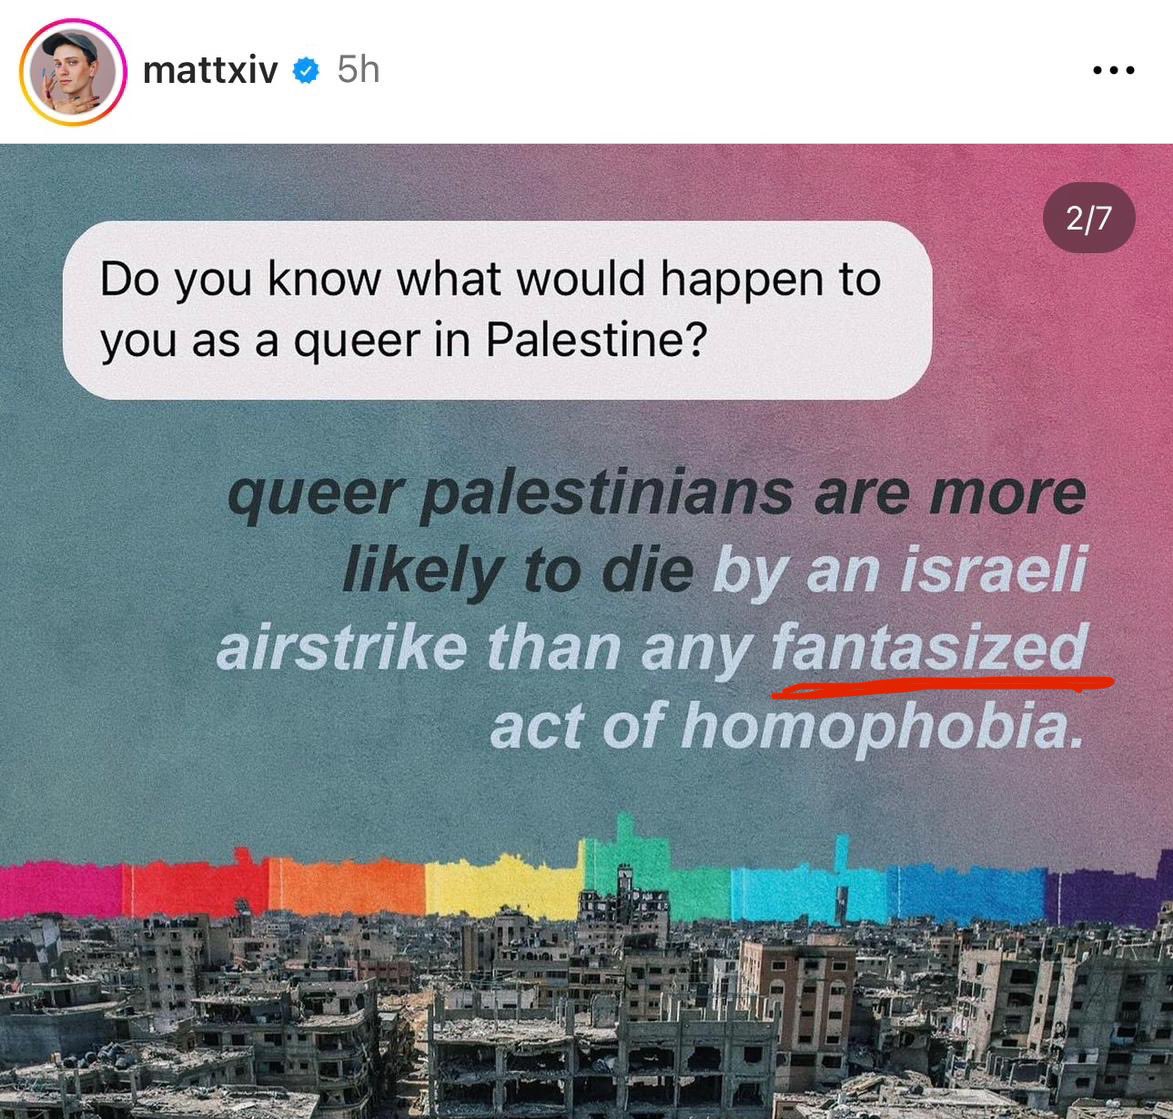 An American Queer guy says homophobia, and the slaughter of gay Palestinians is “fantasized.” And that apparently Israel is only bombing Gay bars or Queer centers in Gaza…? How casually one can erase homophobic violence for ‘likes’ on an anti-Israel post.